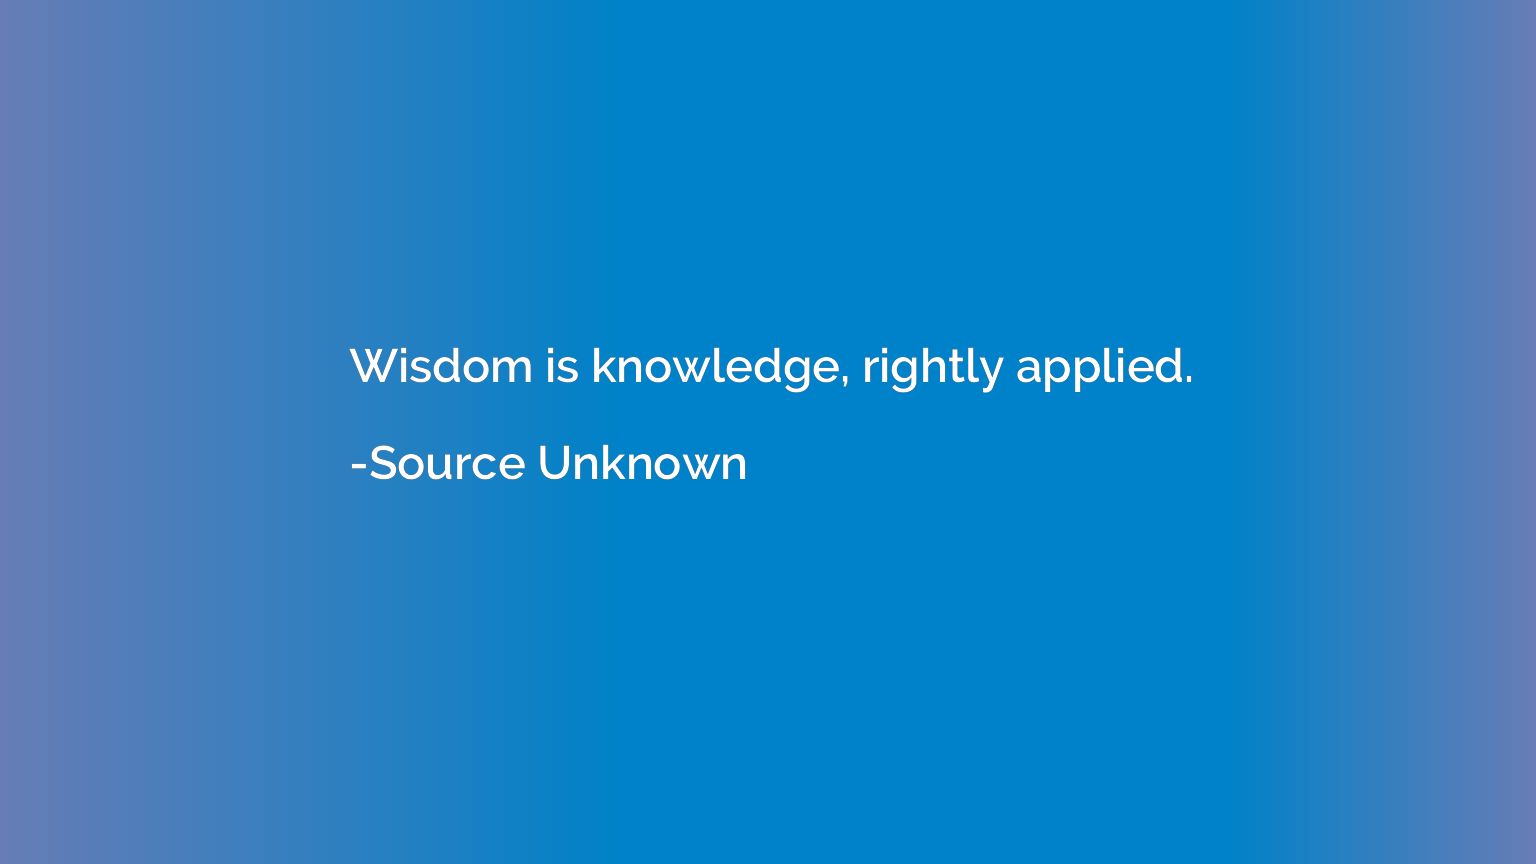 Wisdom is knowledge, rightly applied.